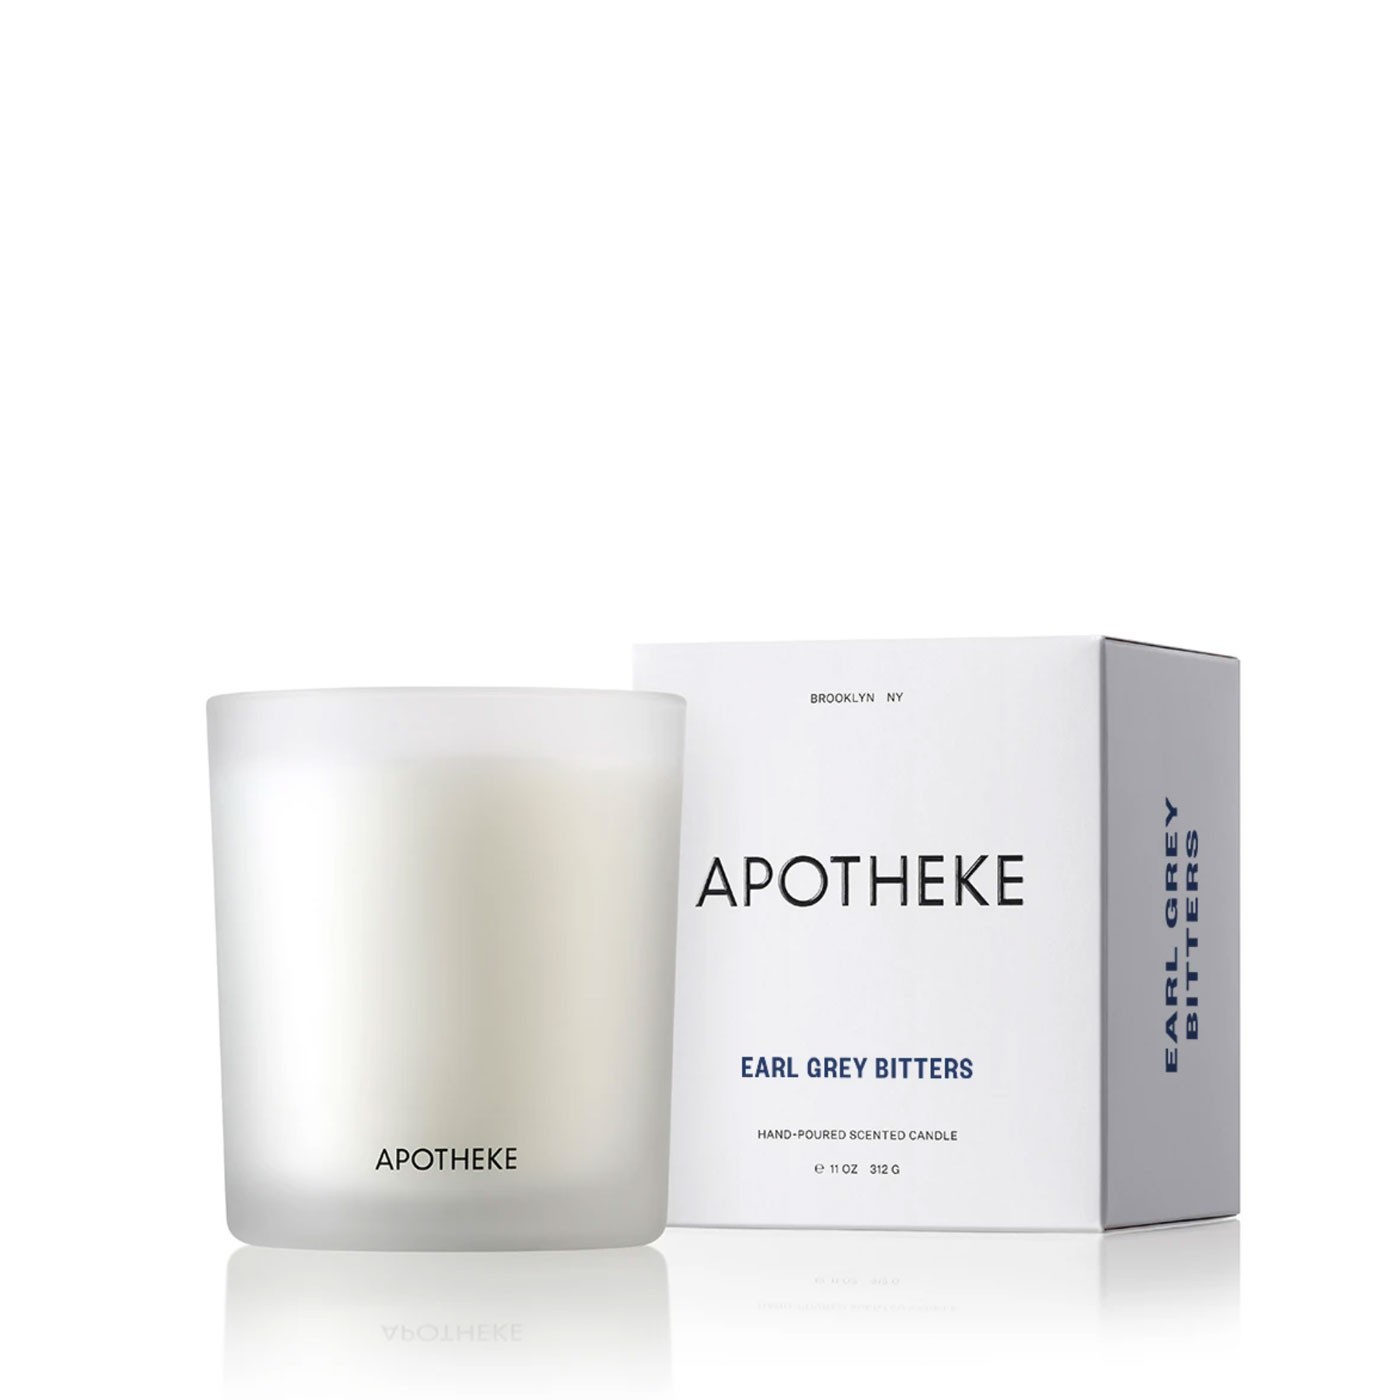 Earl Grey Bitters Scented Candle 11 oz - Apotheke | Eataly.com